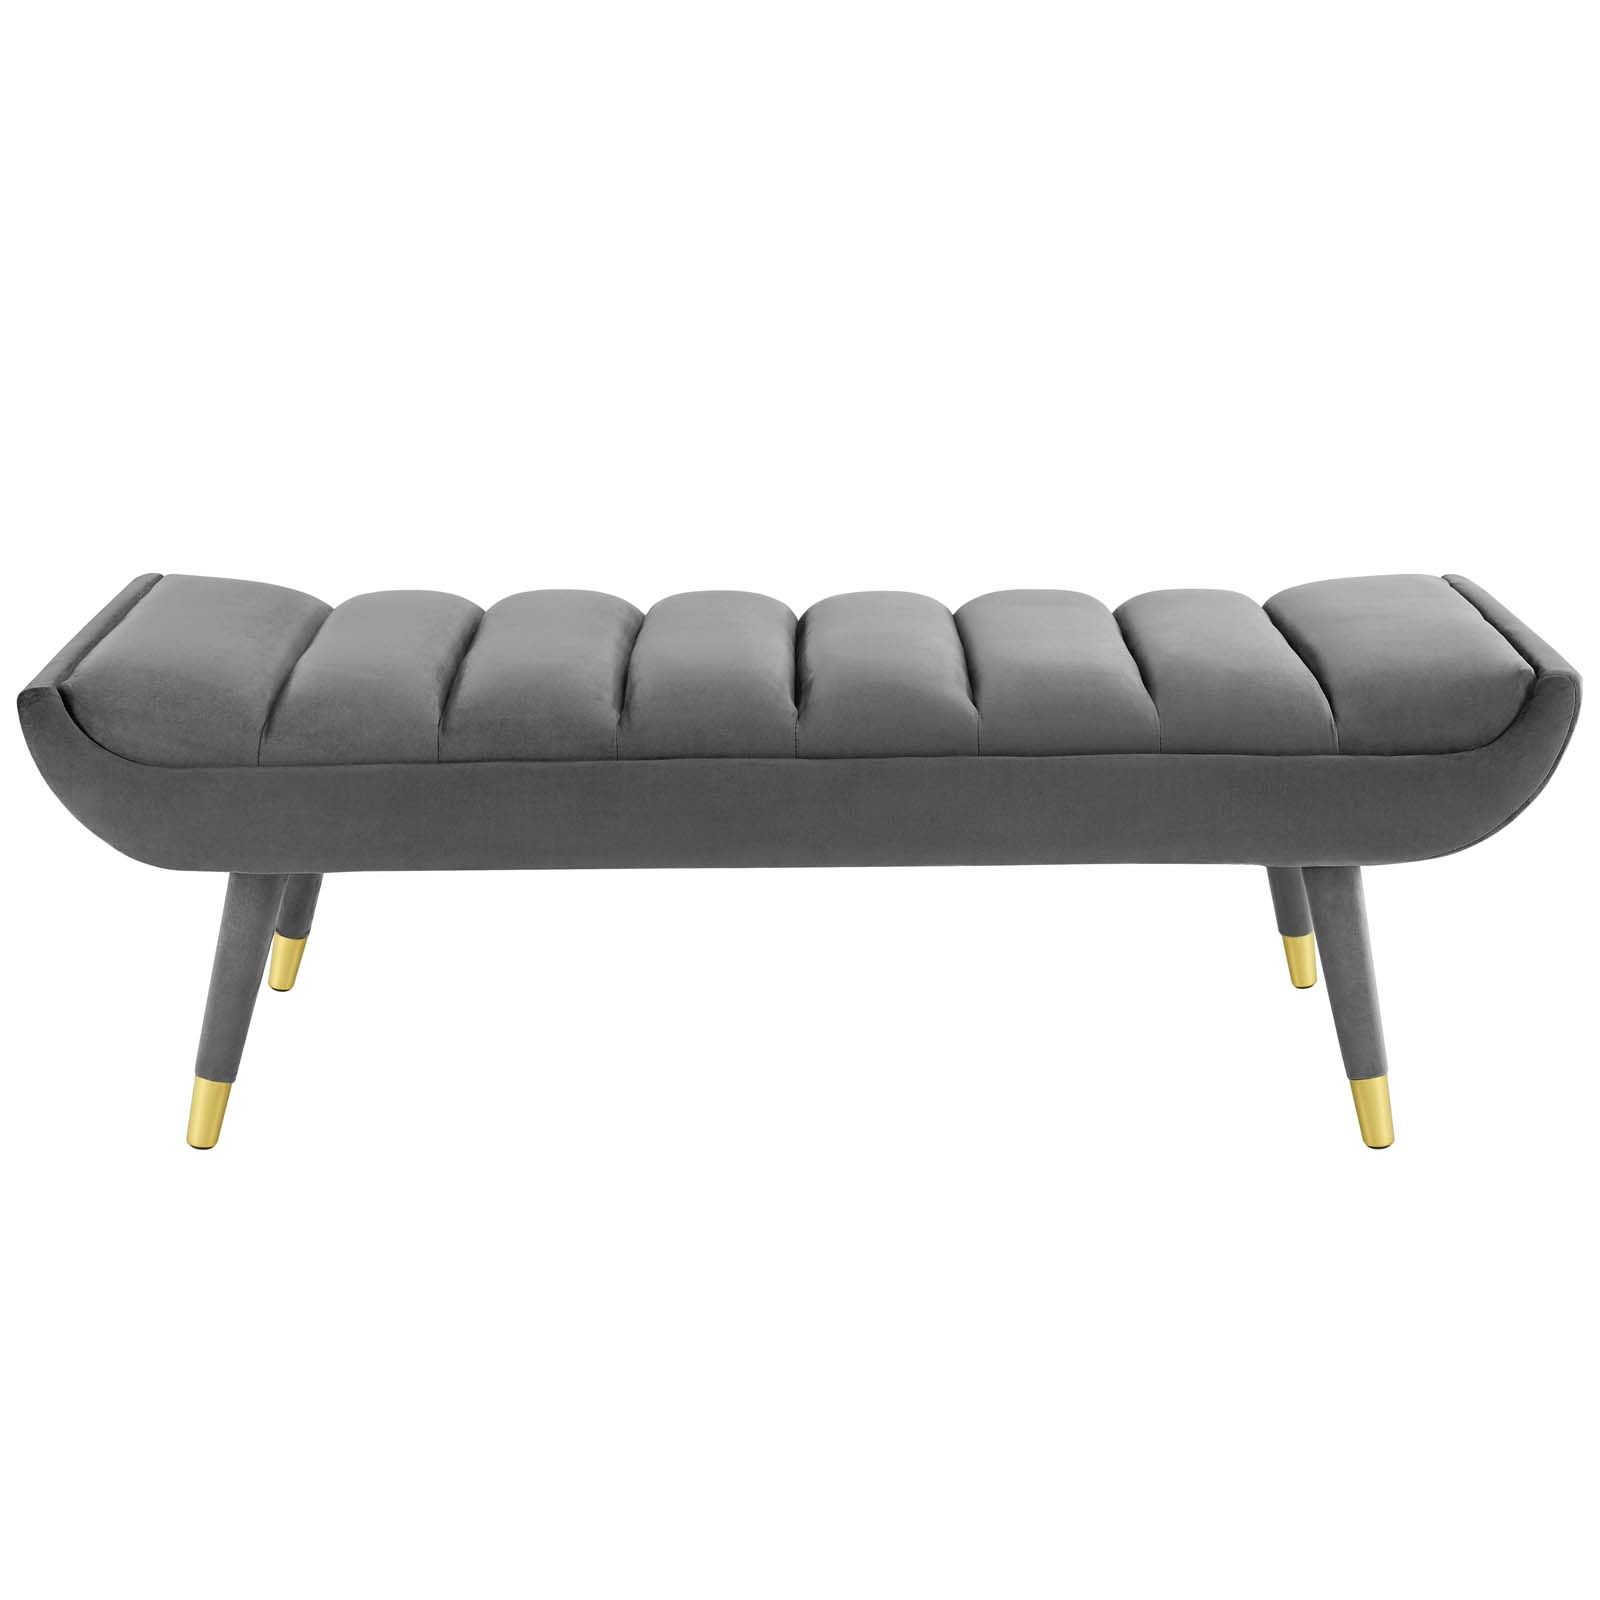 Guess Channel Tufted Performance Velvet Accent Bench Gray With Regard To Most Recently Released Rivet Gray Velvet Fabric Bench (View 5 of 10)